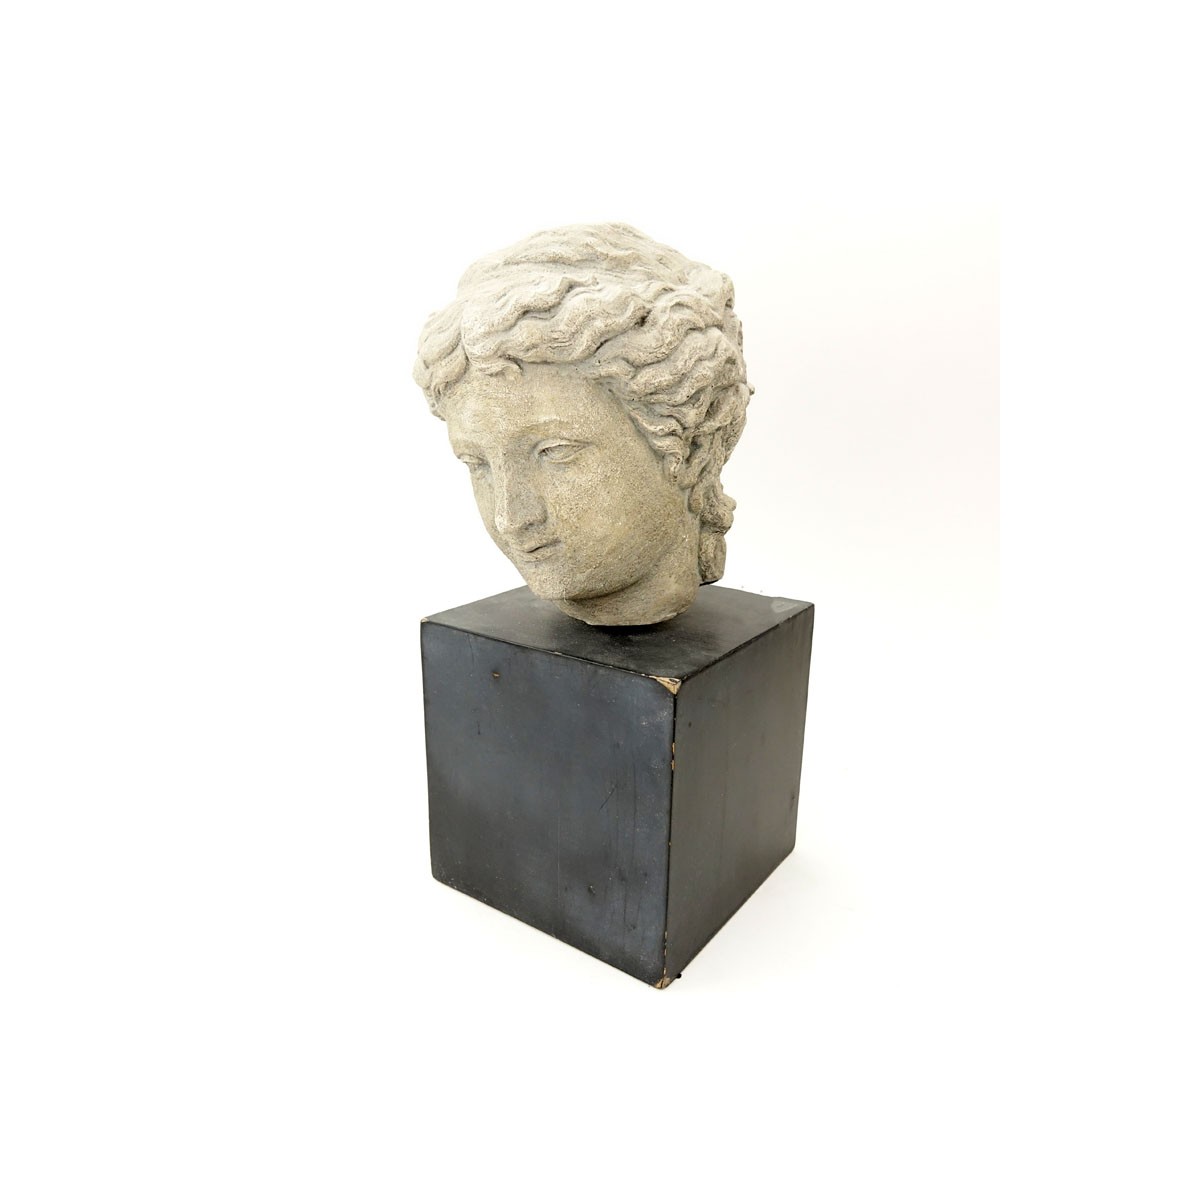 Modern Faux Stone "Greek Bust" on Wood Stand. Unsigned. Wear, rubbing. Measures 17" H including bas